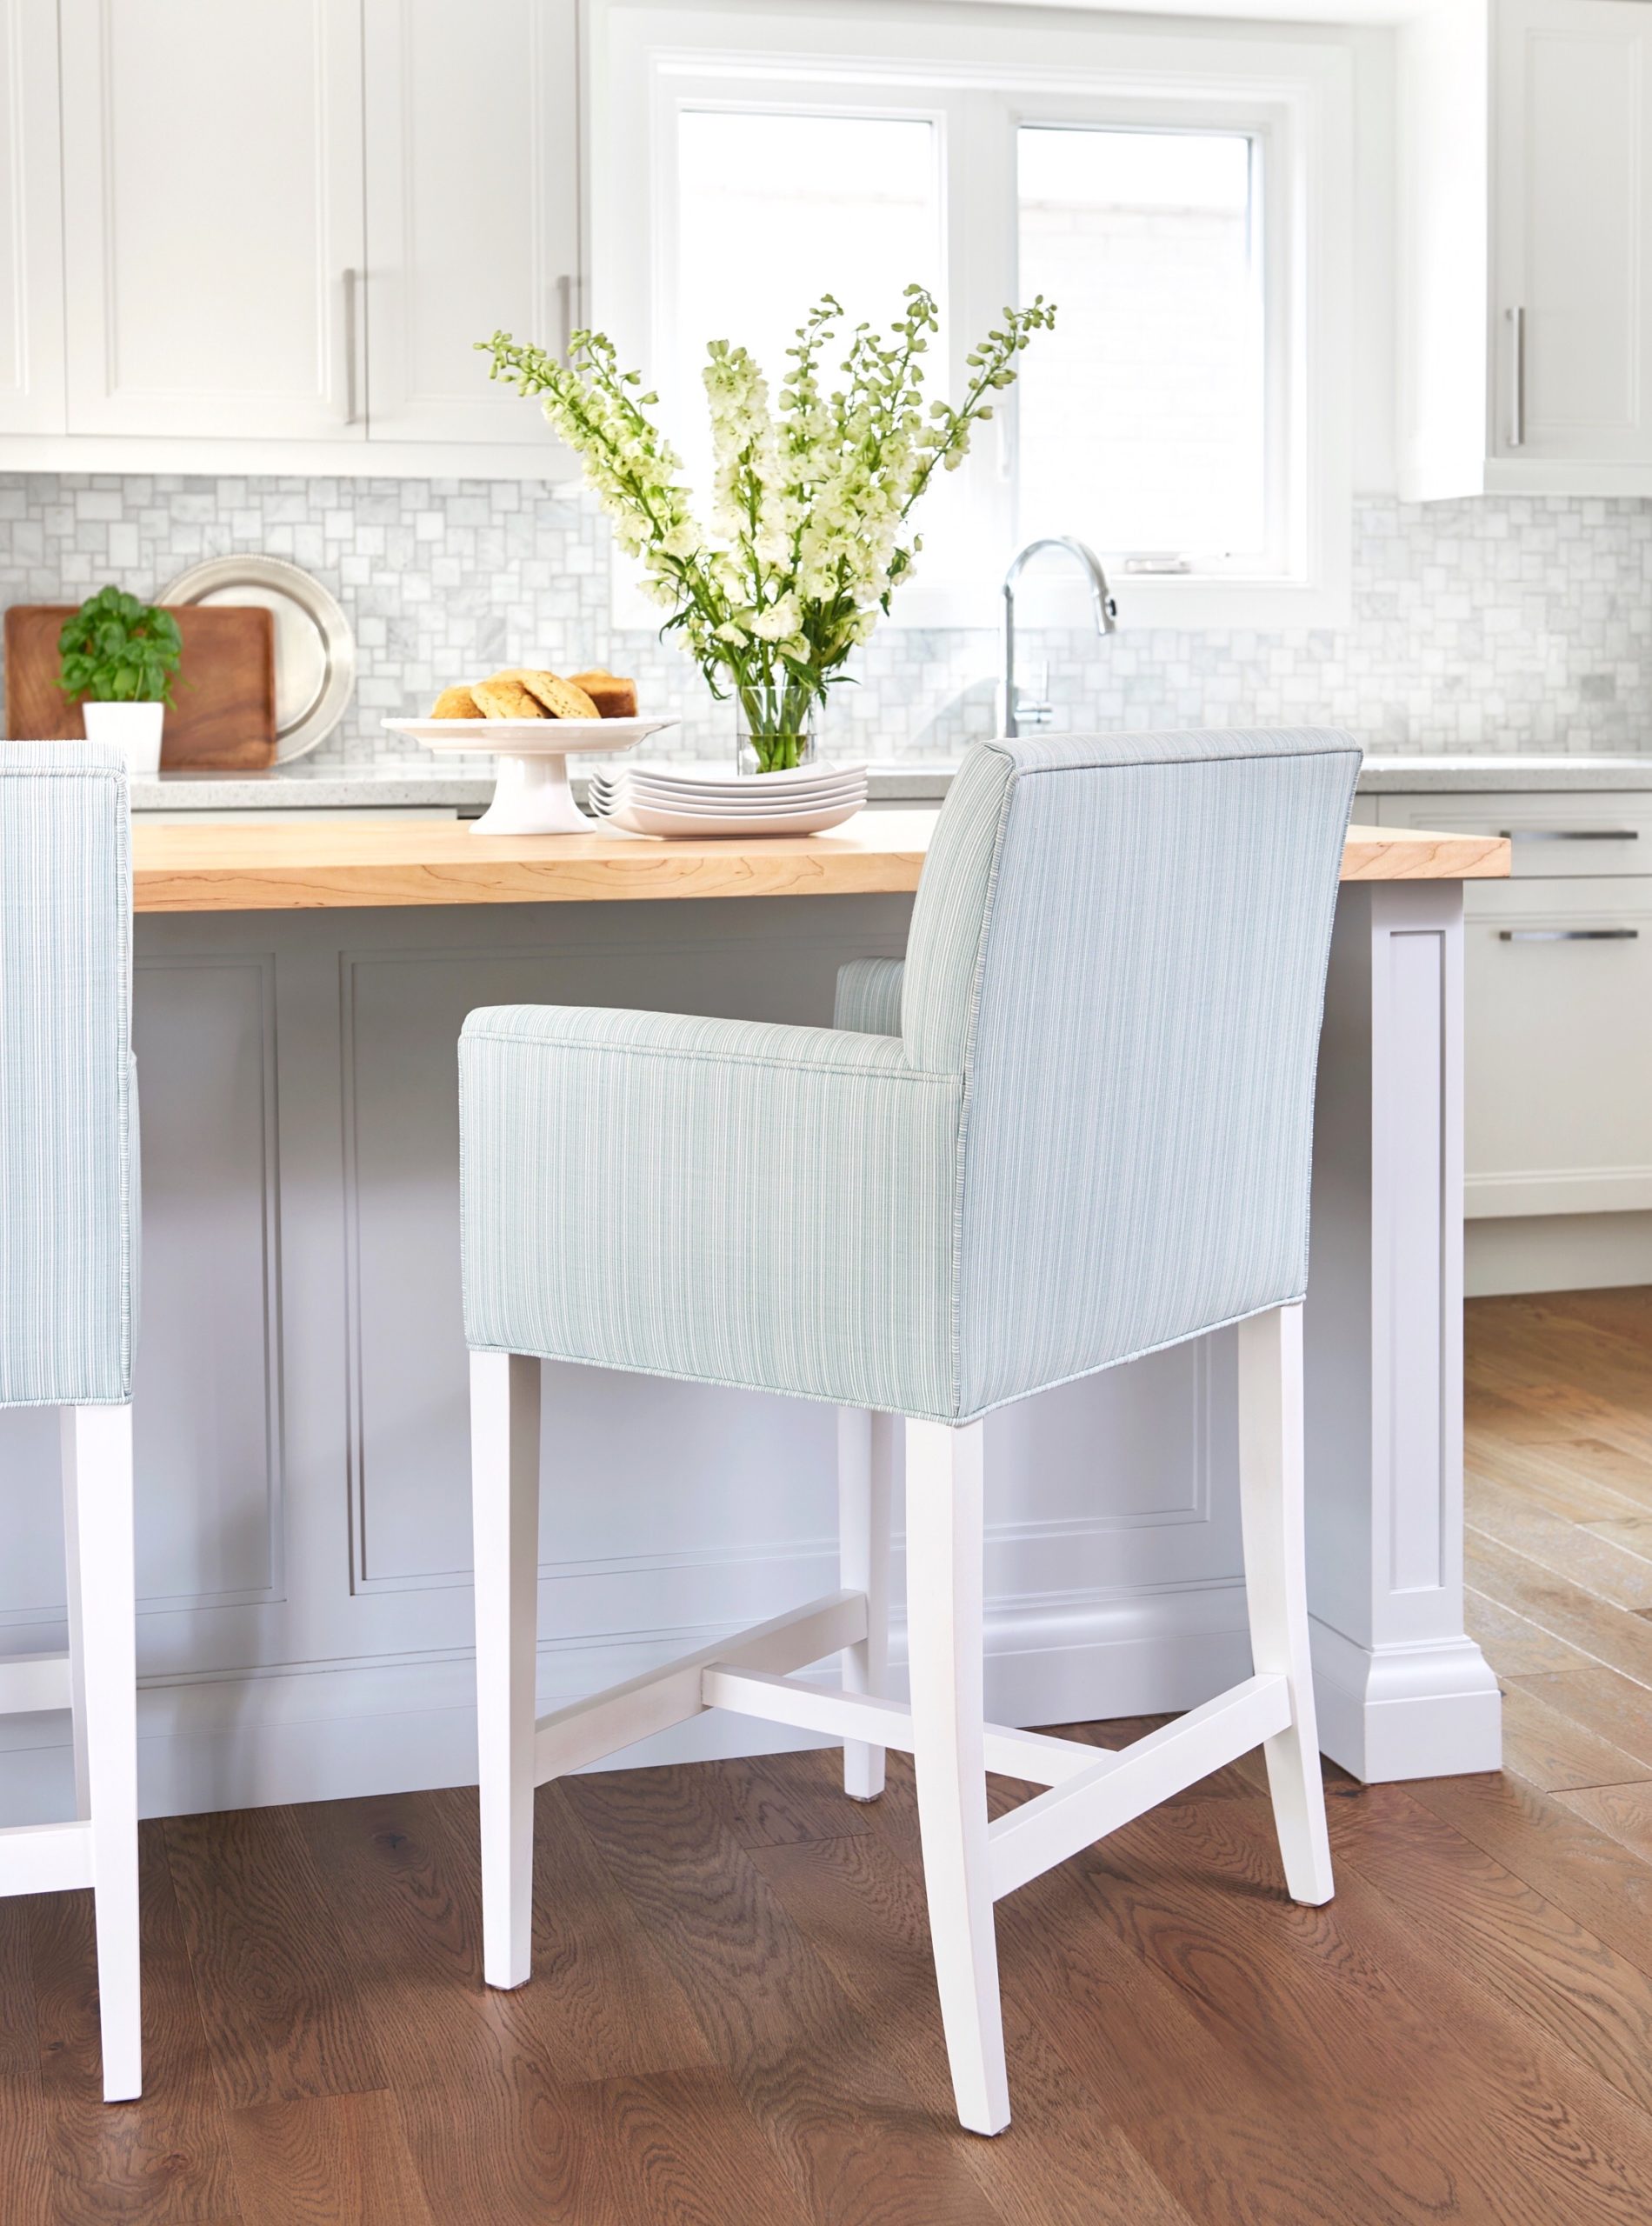 kitchen island with an upholstered stool in front that has white legs and a light blue fabric